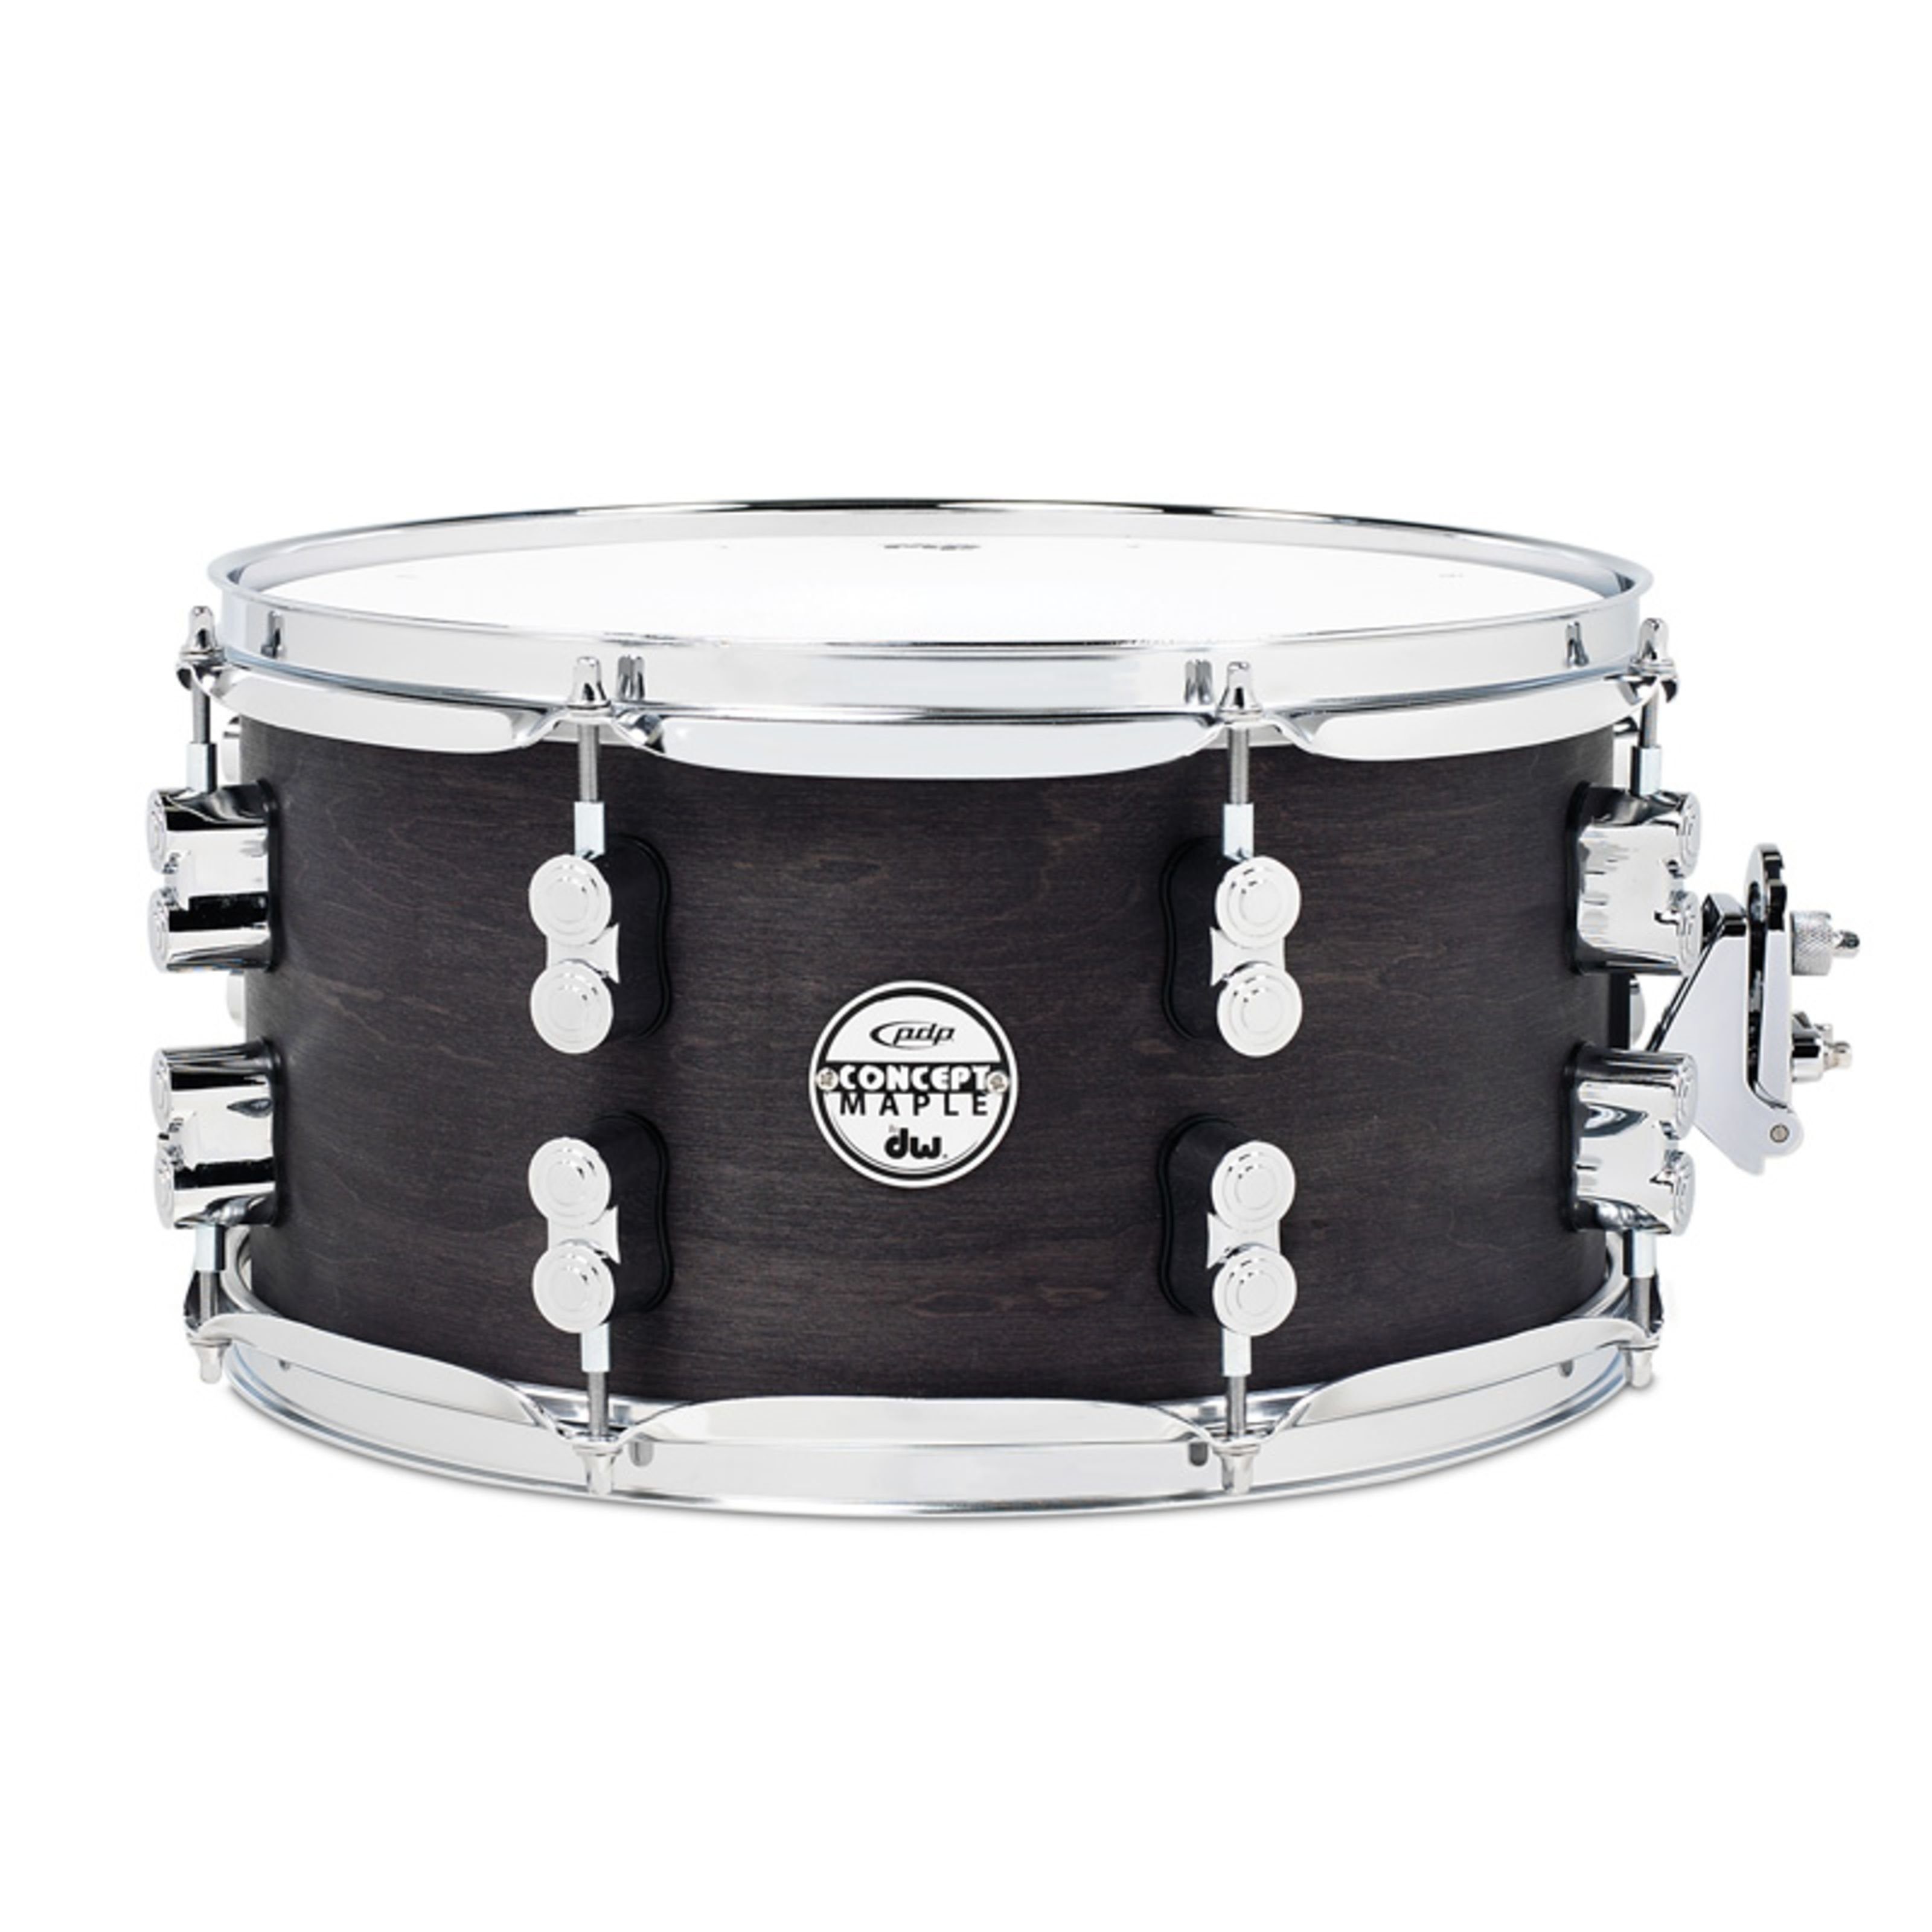 pdp Snare Drum,Black Wax Snare 13"x55", Schlagzeuge, Snare Drums, Black Wax Snare 13"x5,5" - Snare Drum